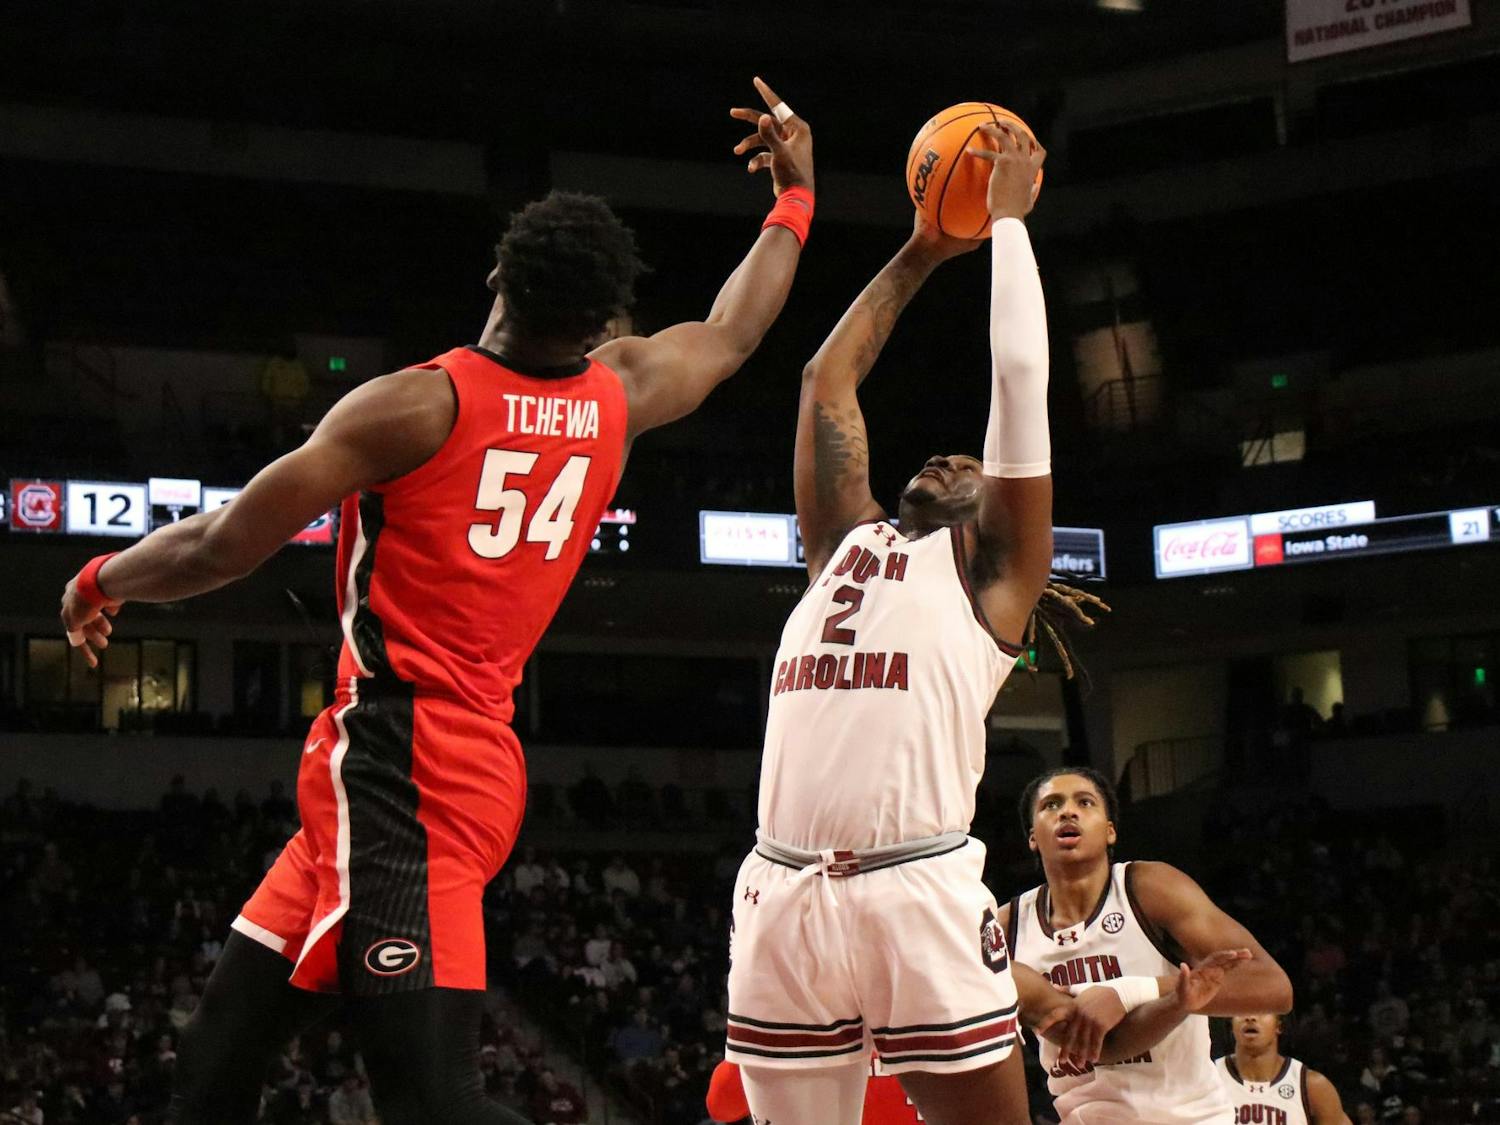 Graduate student forward B.J. Mack catches a rebound during South Carolina's game against Georgia at Colonial Life Arena on Jan. 16, 2024. Mack scored 16 points and had five rebounds in the Gamecocks' 74-69 loss to the Bulldogs.